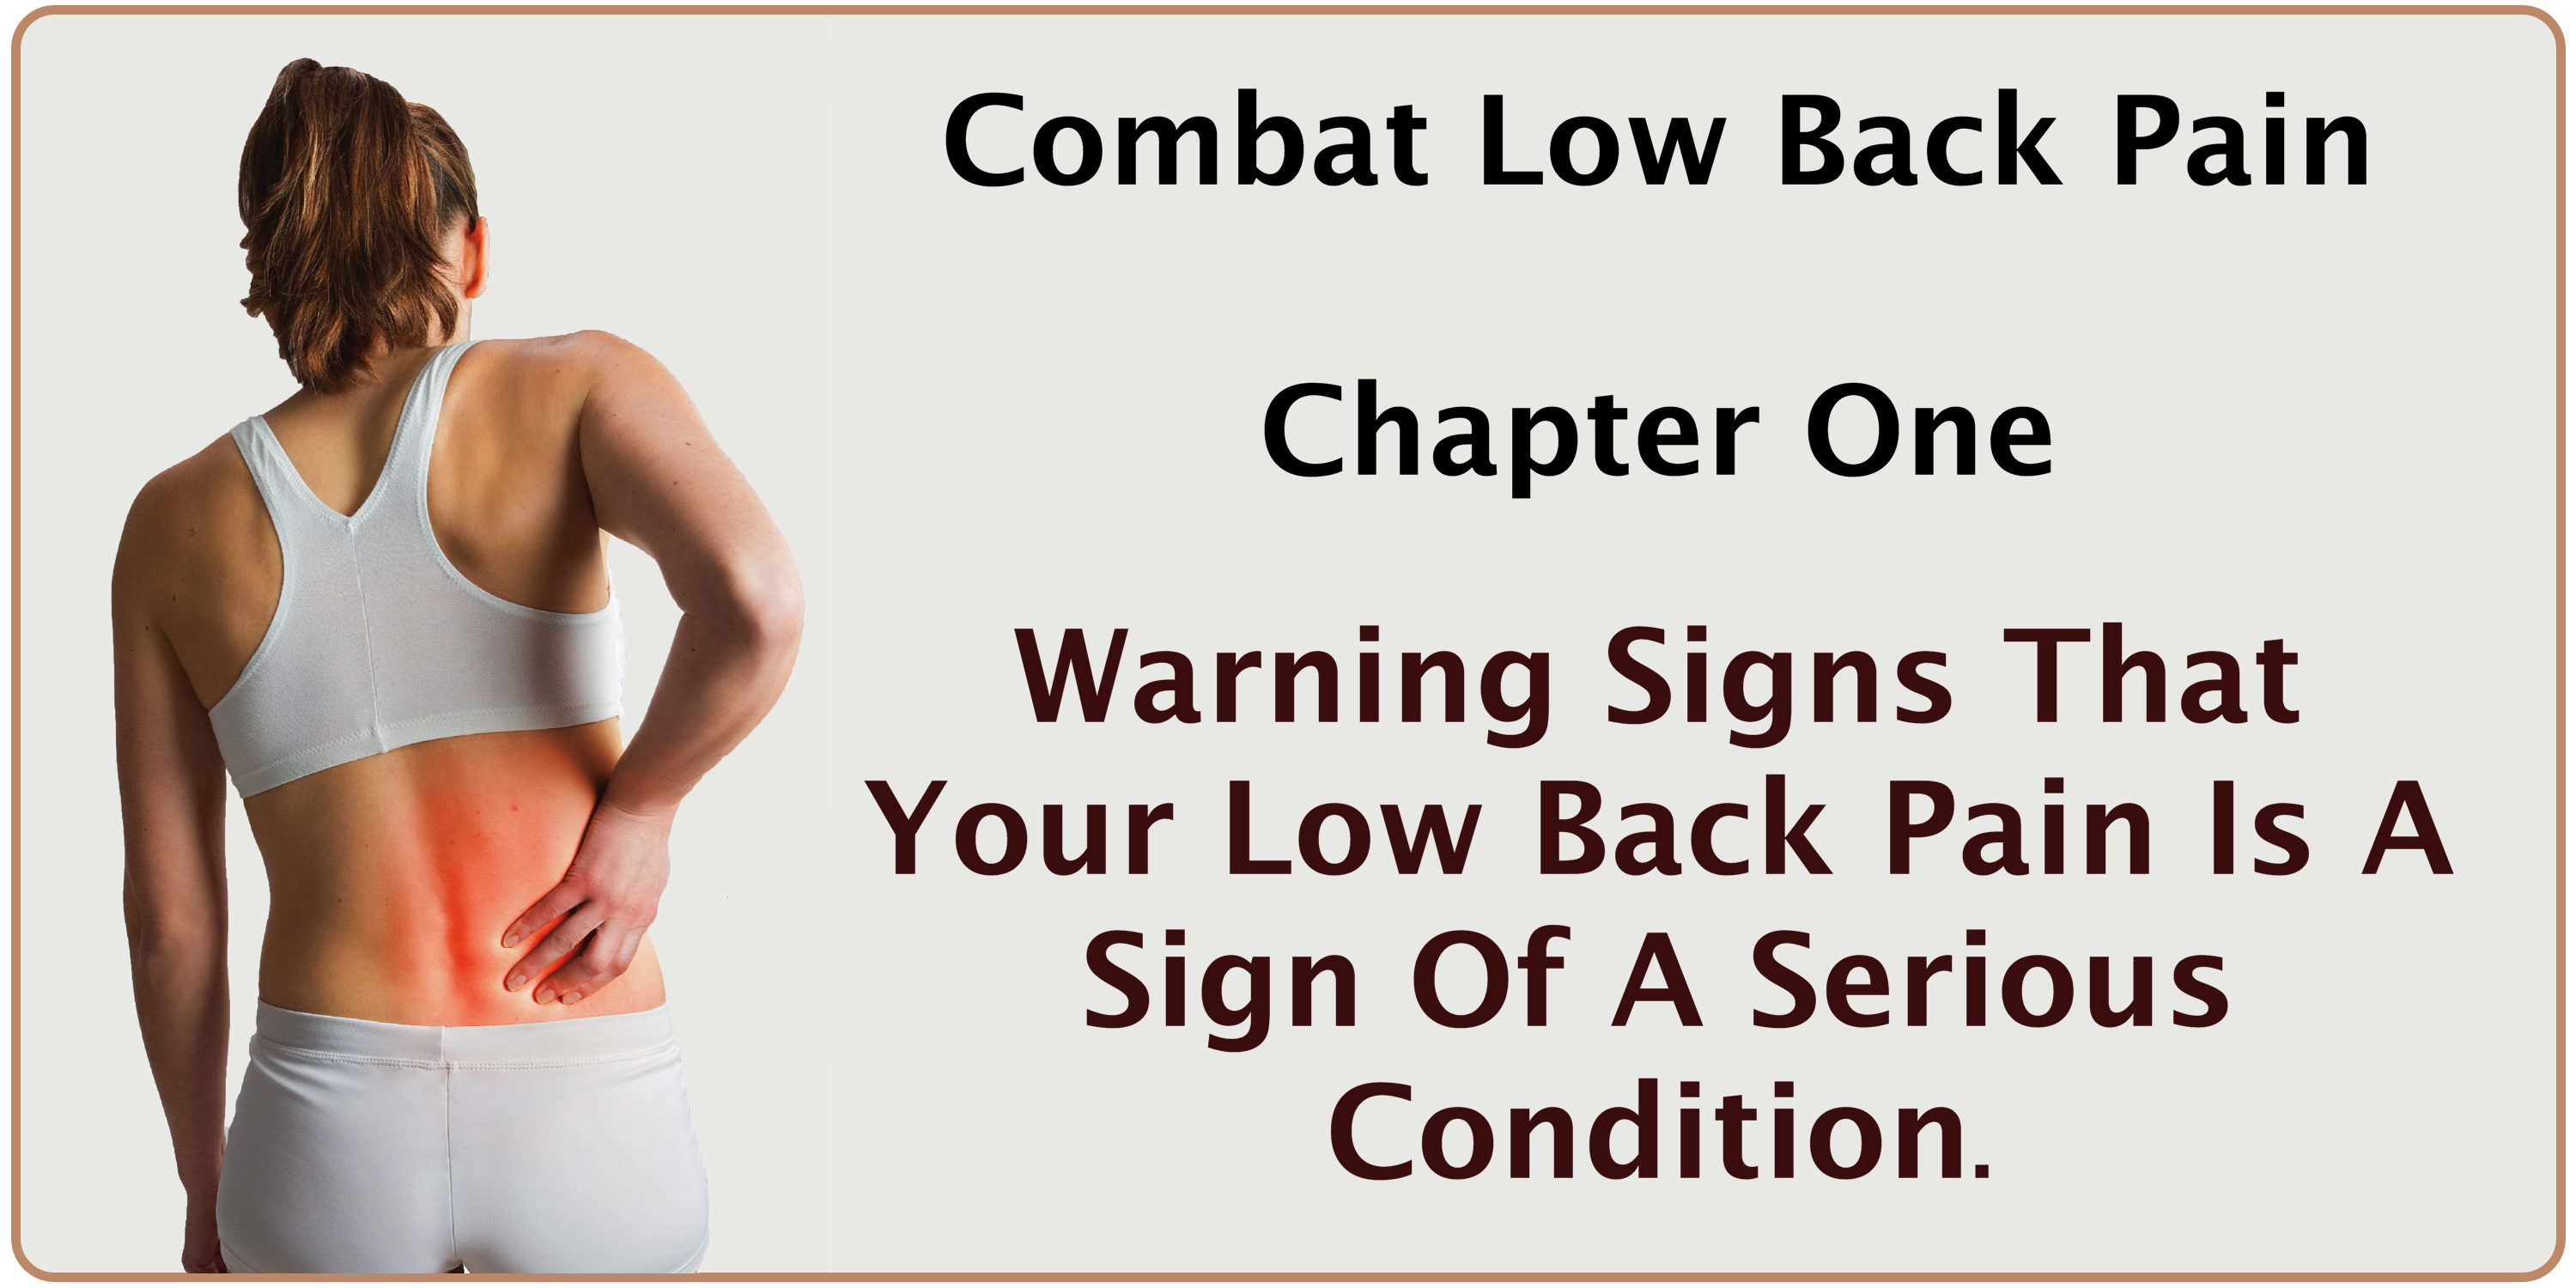 Warning signs of low back pain